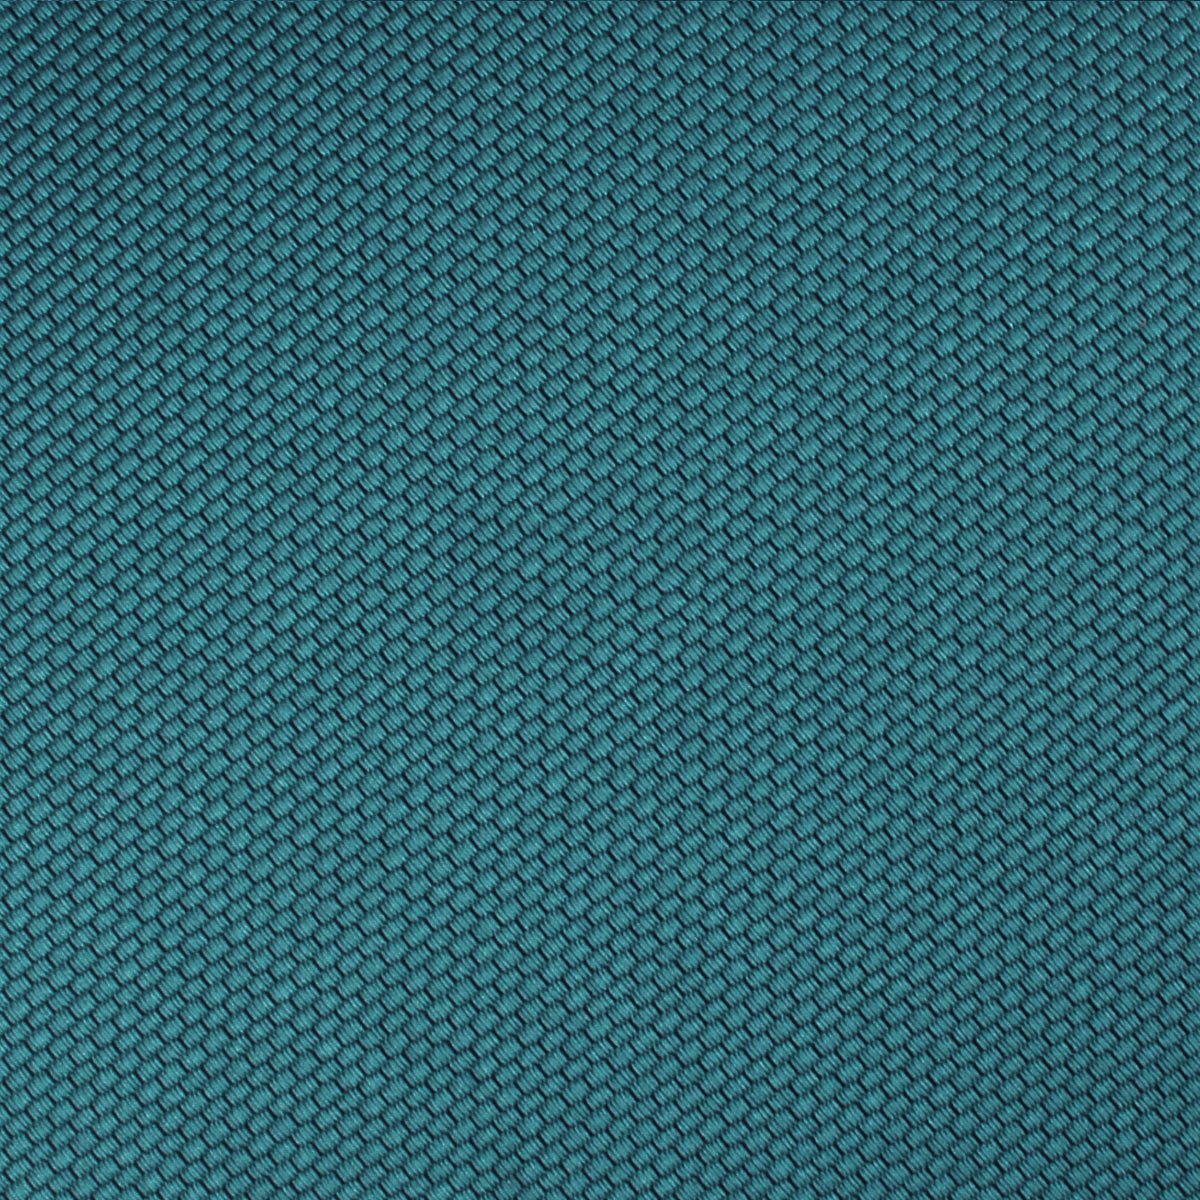 Oasis Blue Weave Fabric Swatch